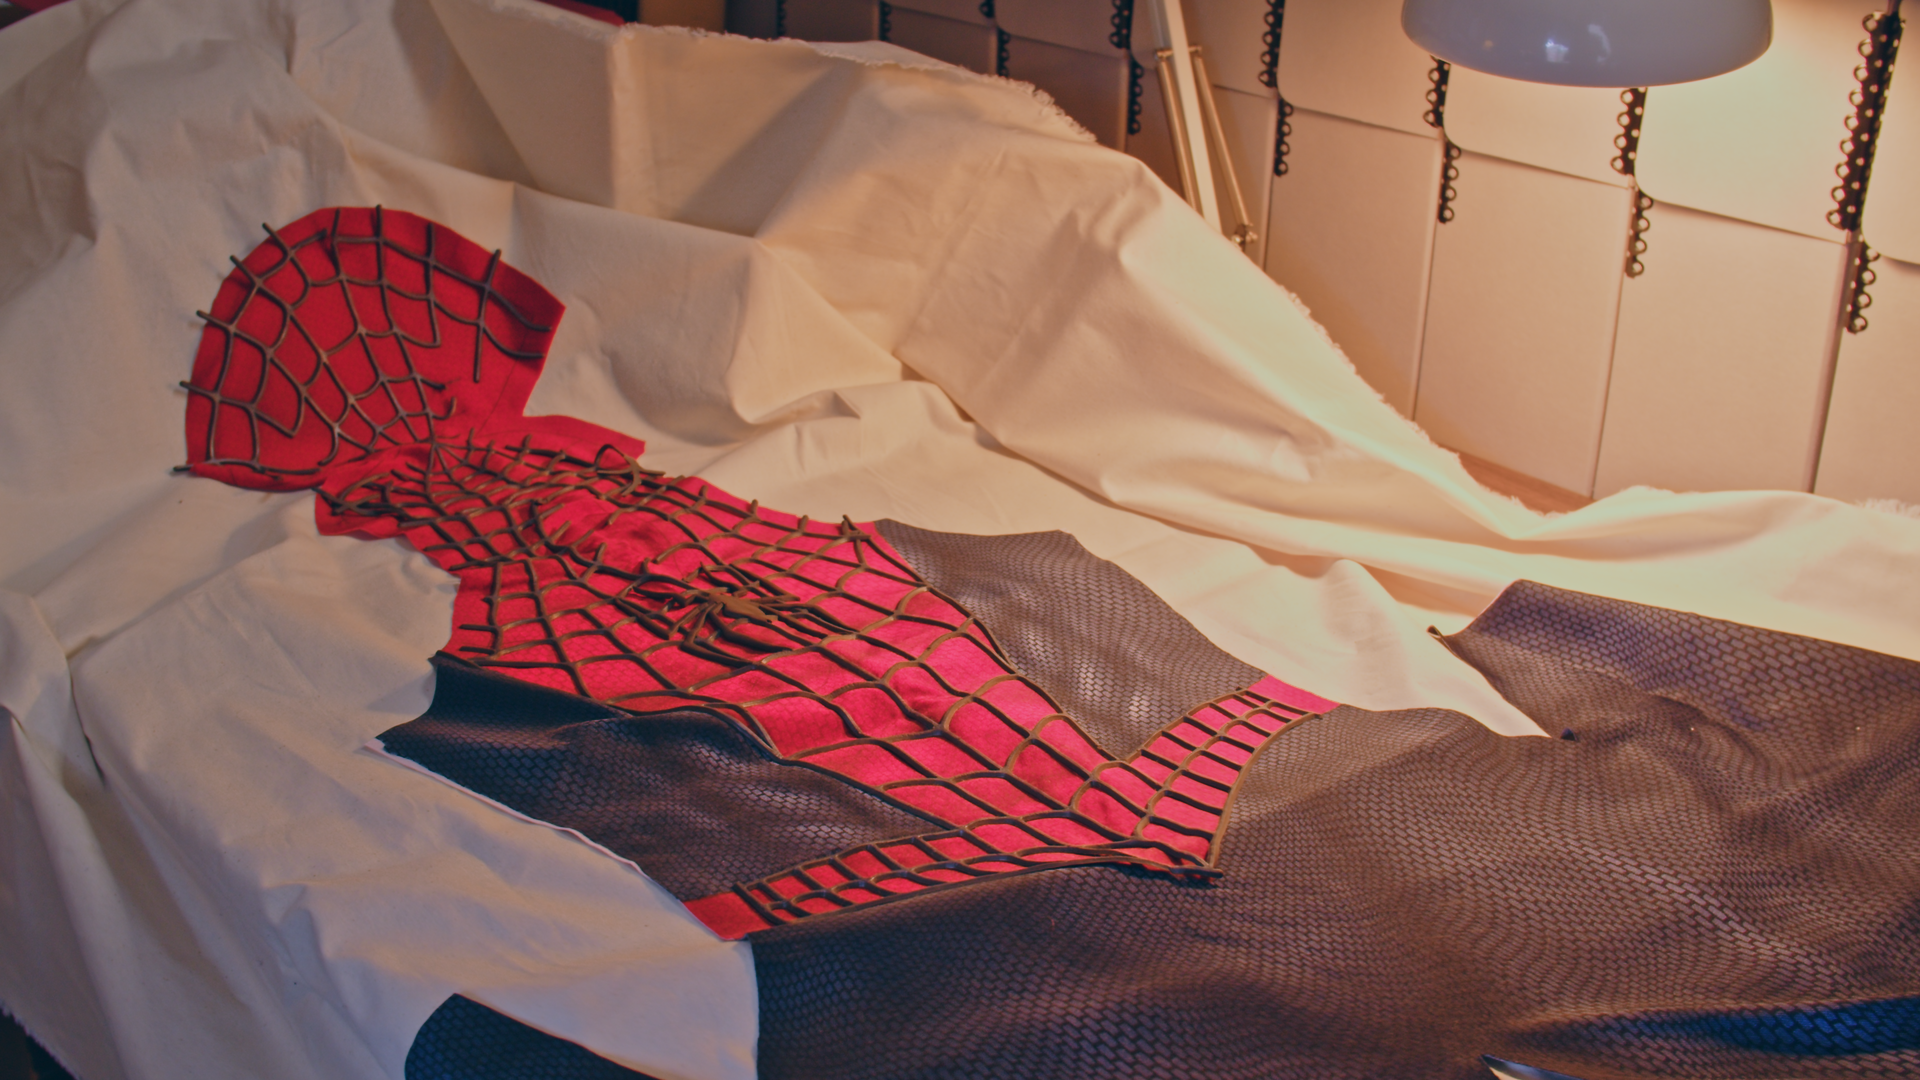 Spider-Man's suit on white sheets.